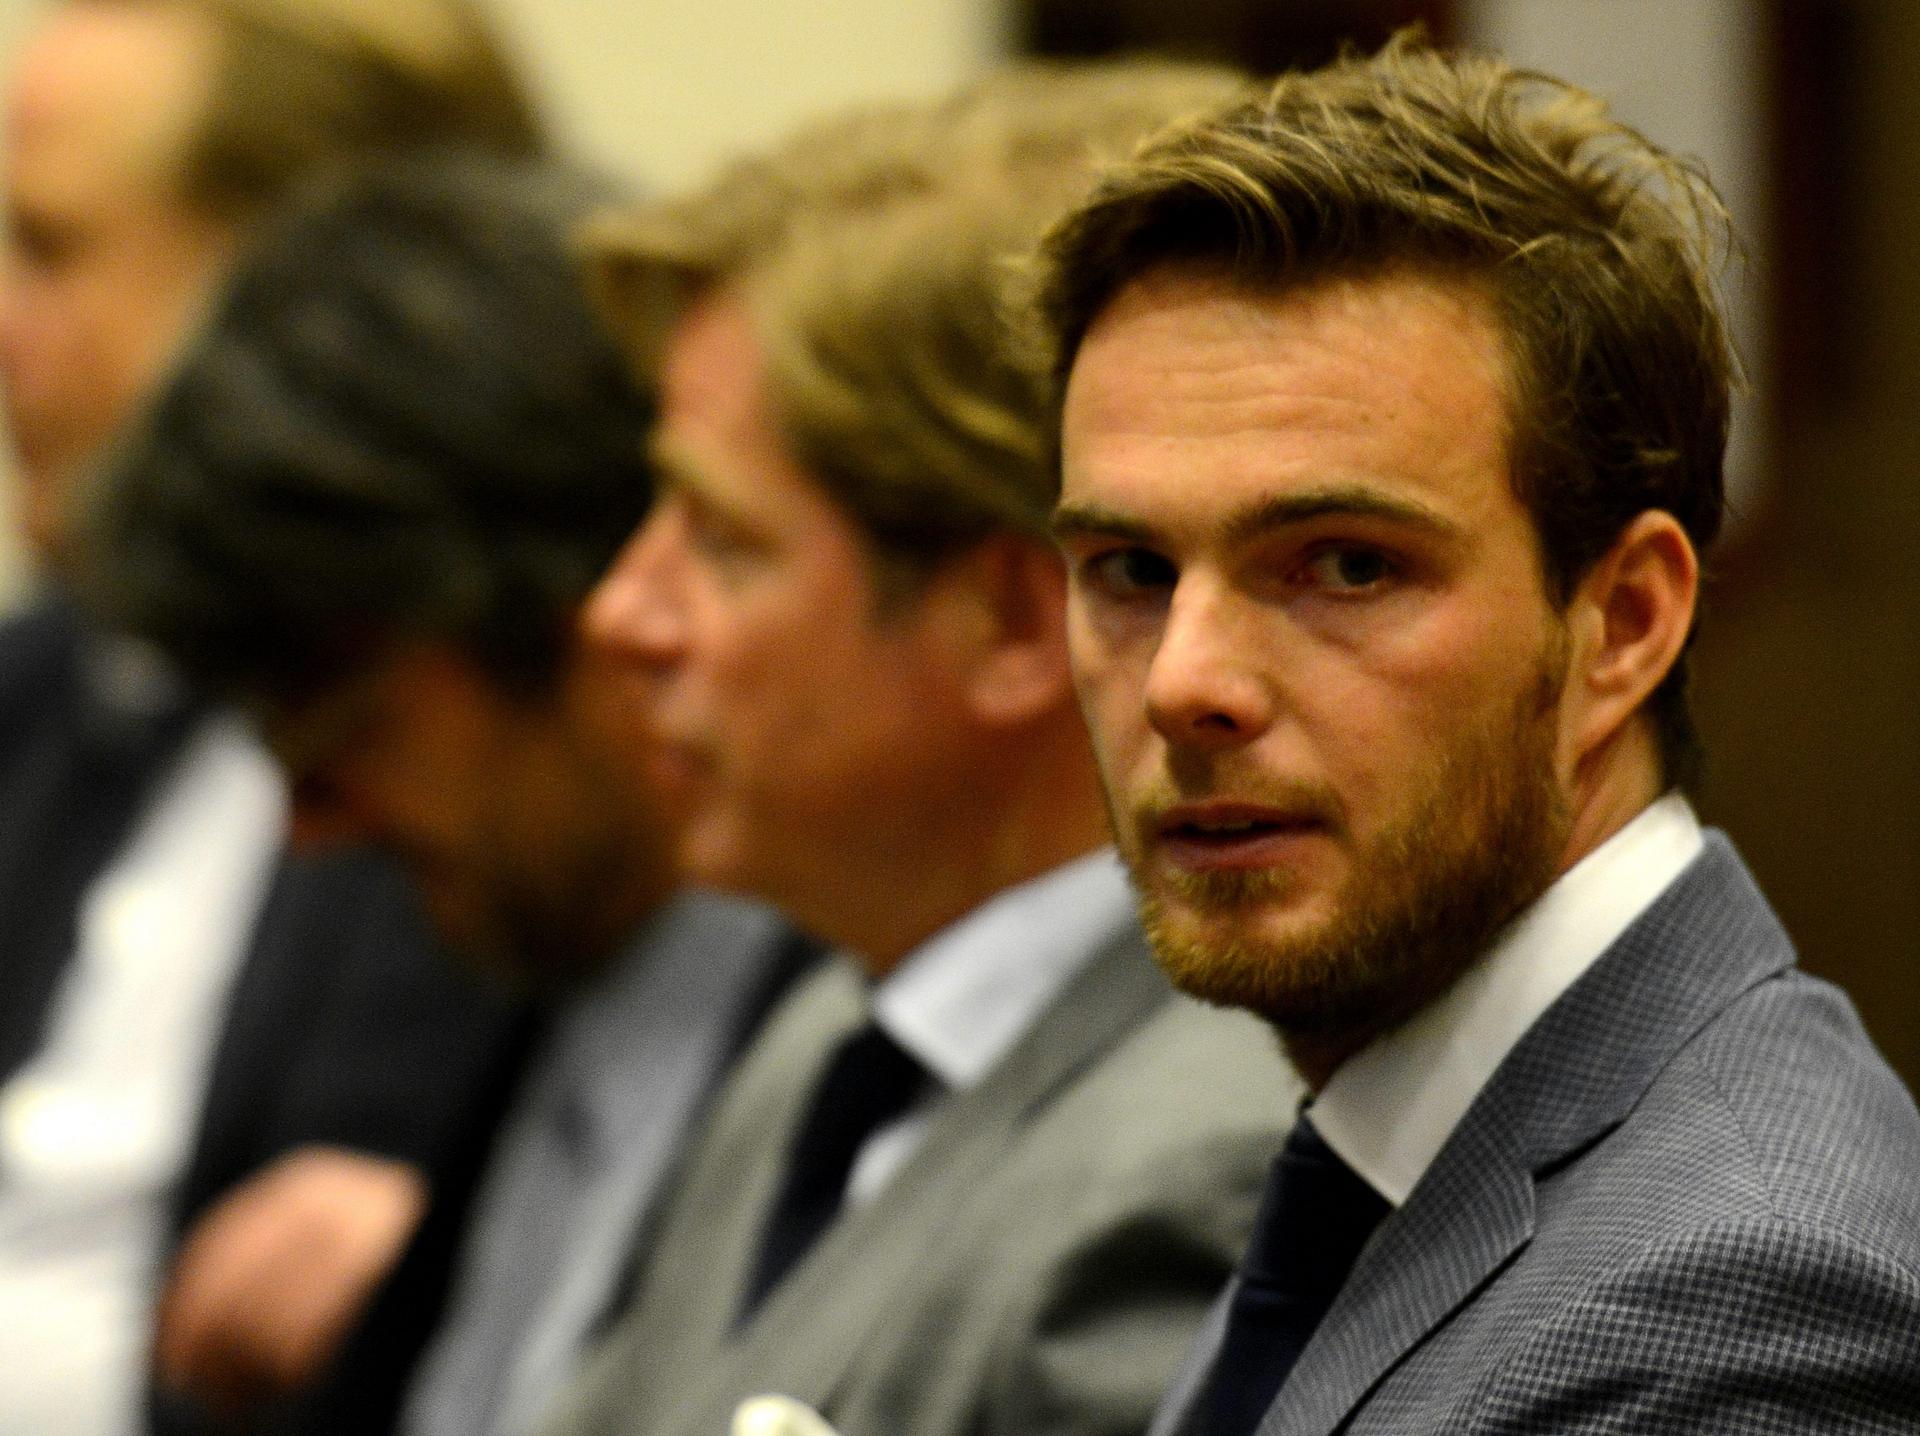 Dutch driver Giedo van der Garde in a Melbourne courtroom duirng his case against Swedish team Sauber. He eventually dropped his case and agreed to a settlement. Photo: EPA

